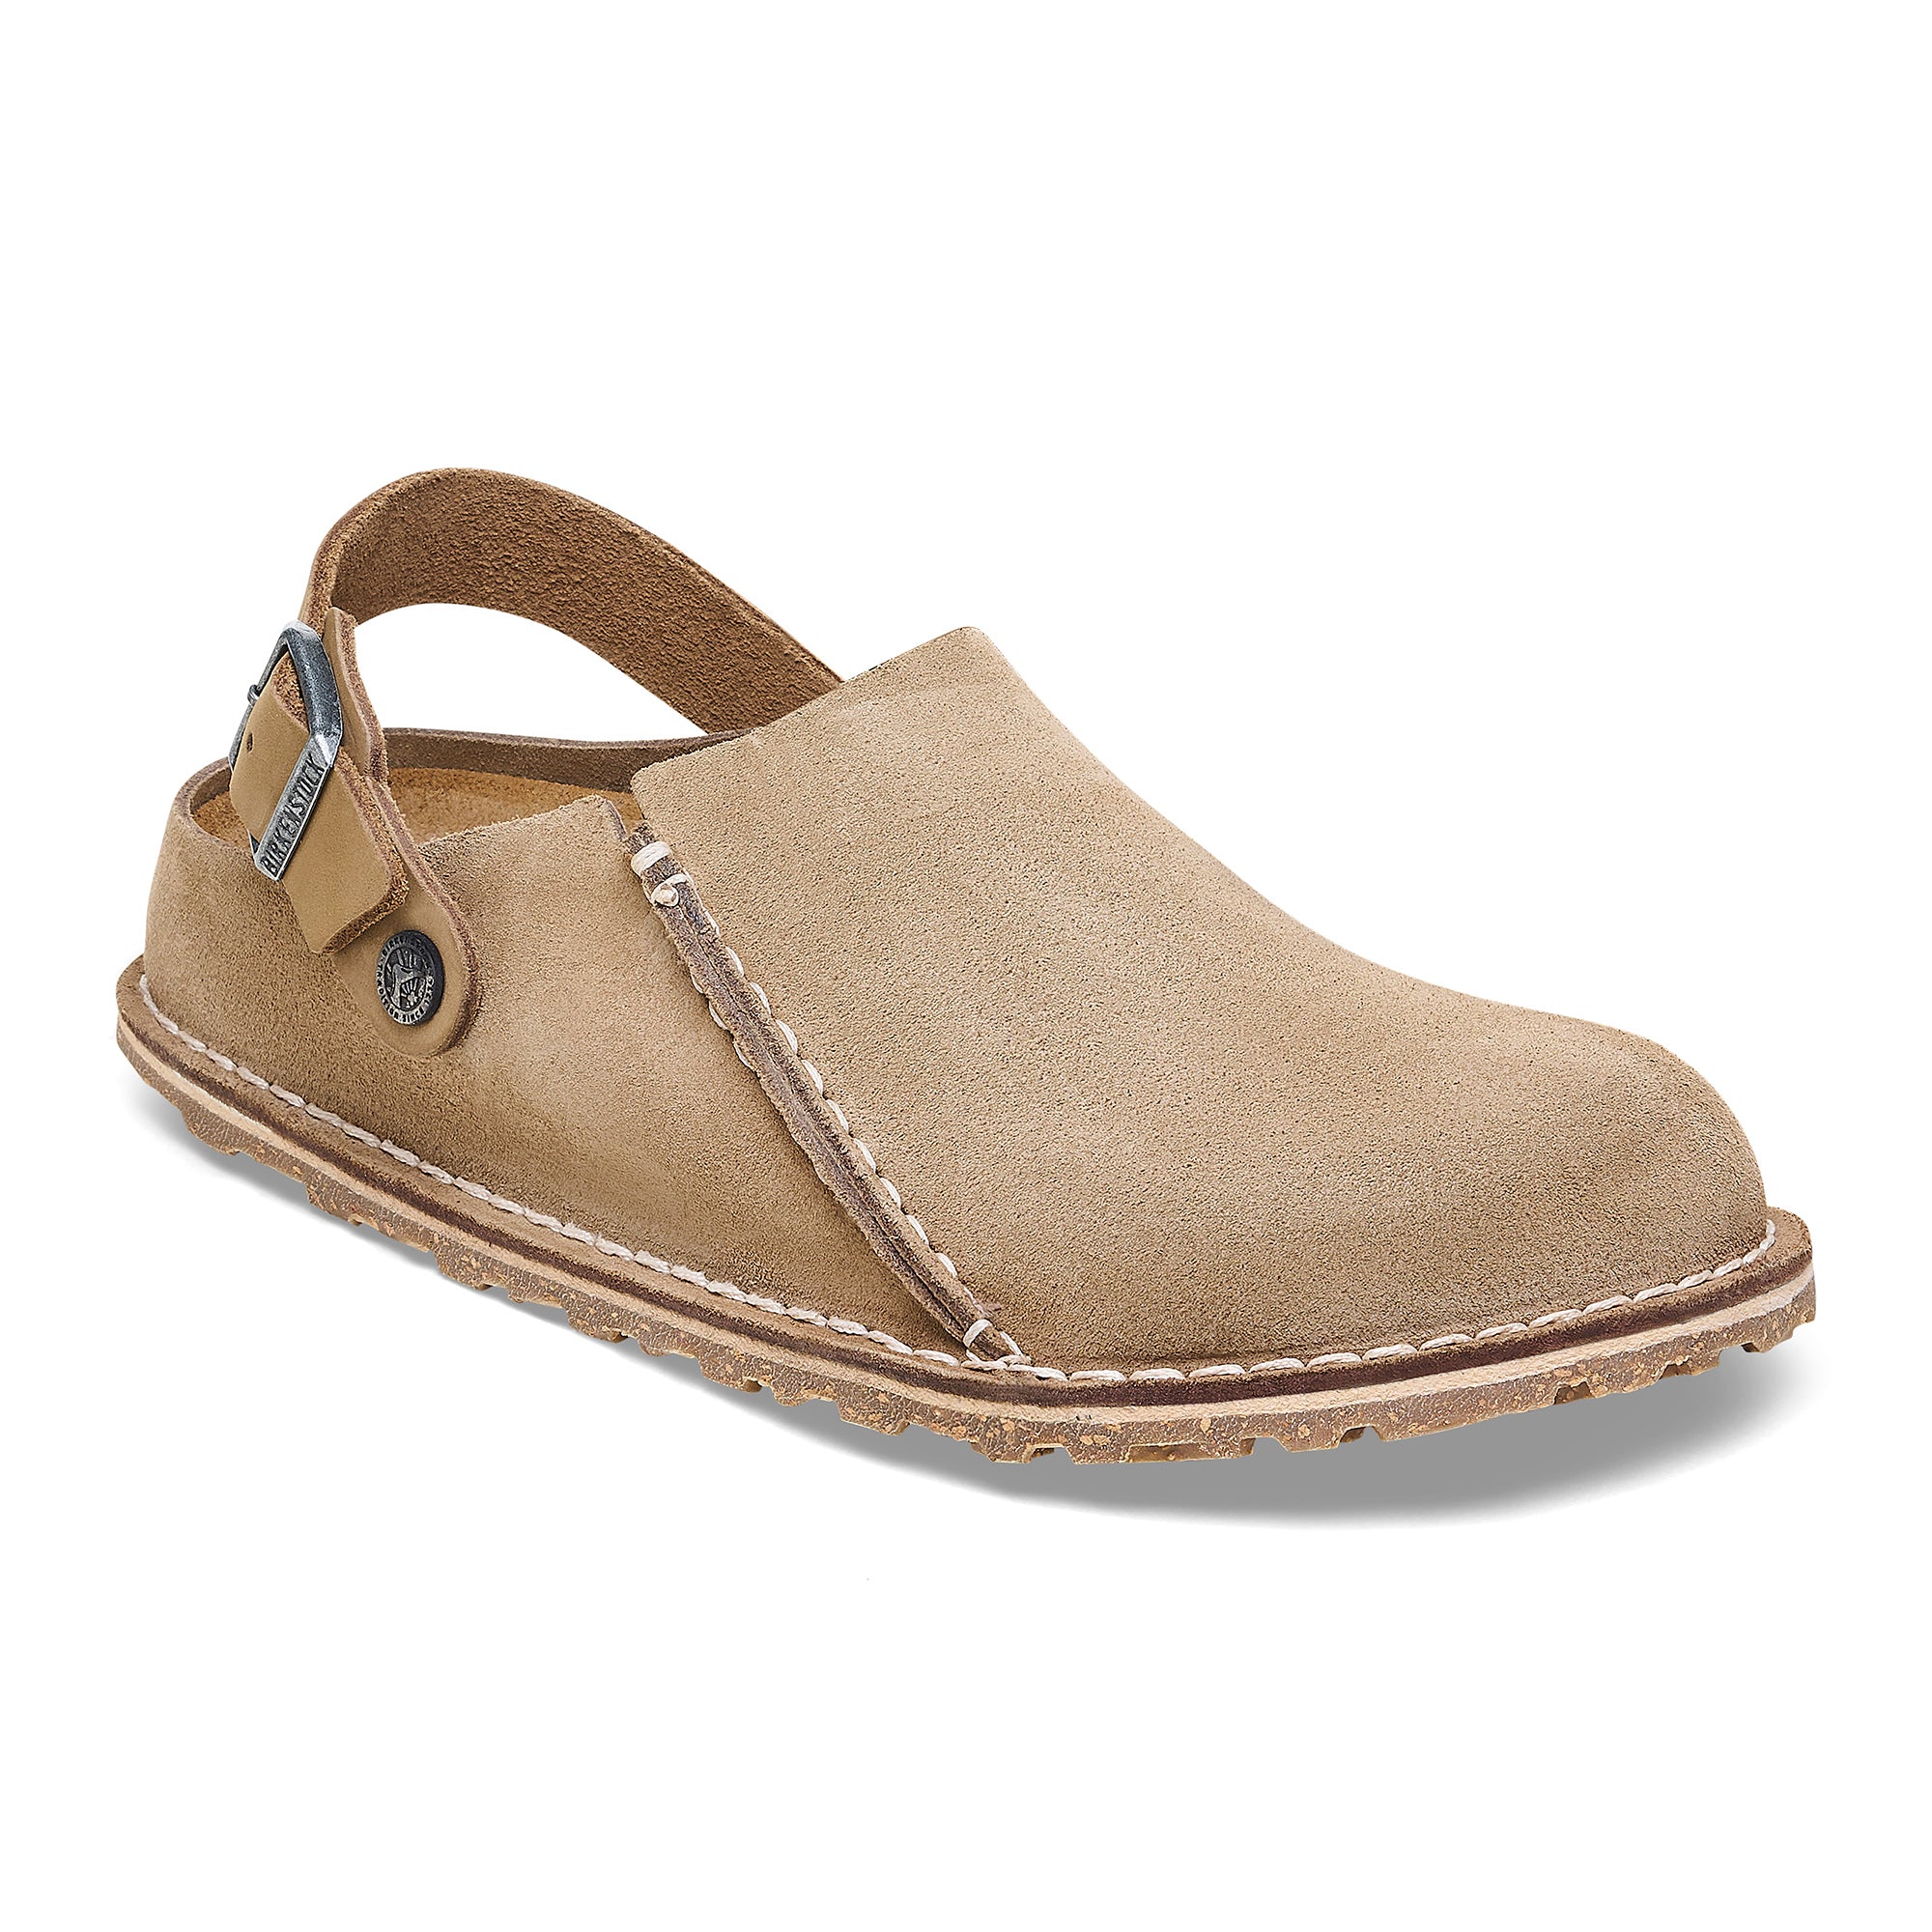 Lutry Grey/Taupe Suede Clog